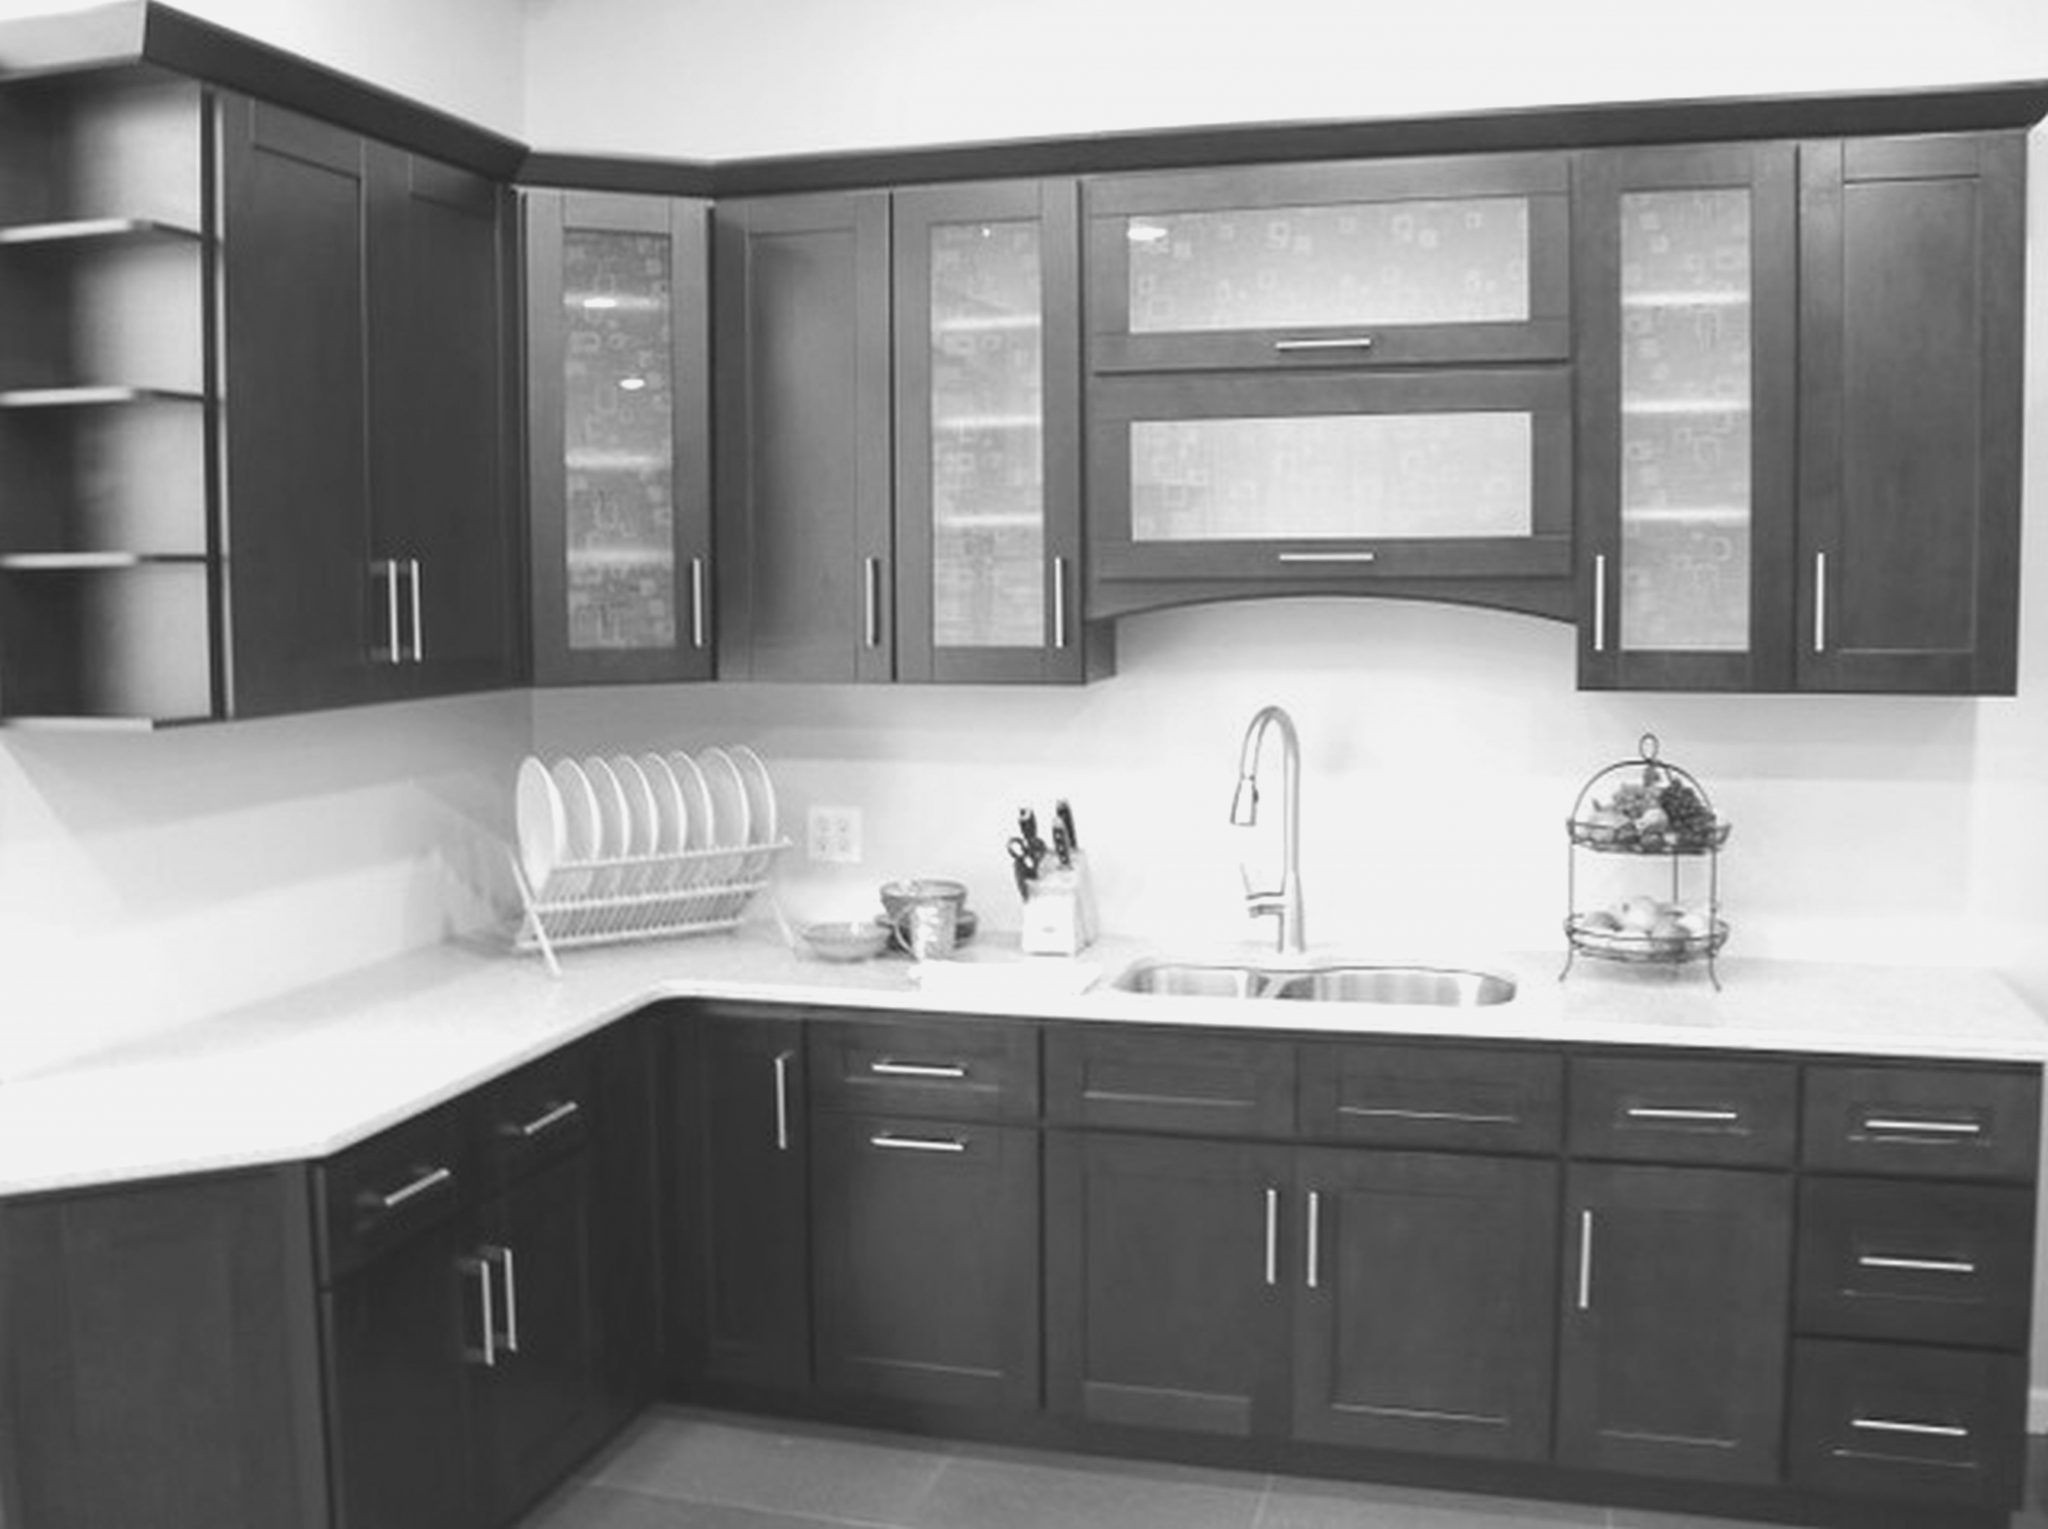 Frosted Glass Kitchen Cabinets
 Frosted Glass Inserts For Kitchen Cabinets Black Kitchen